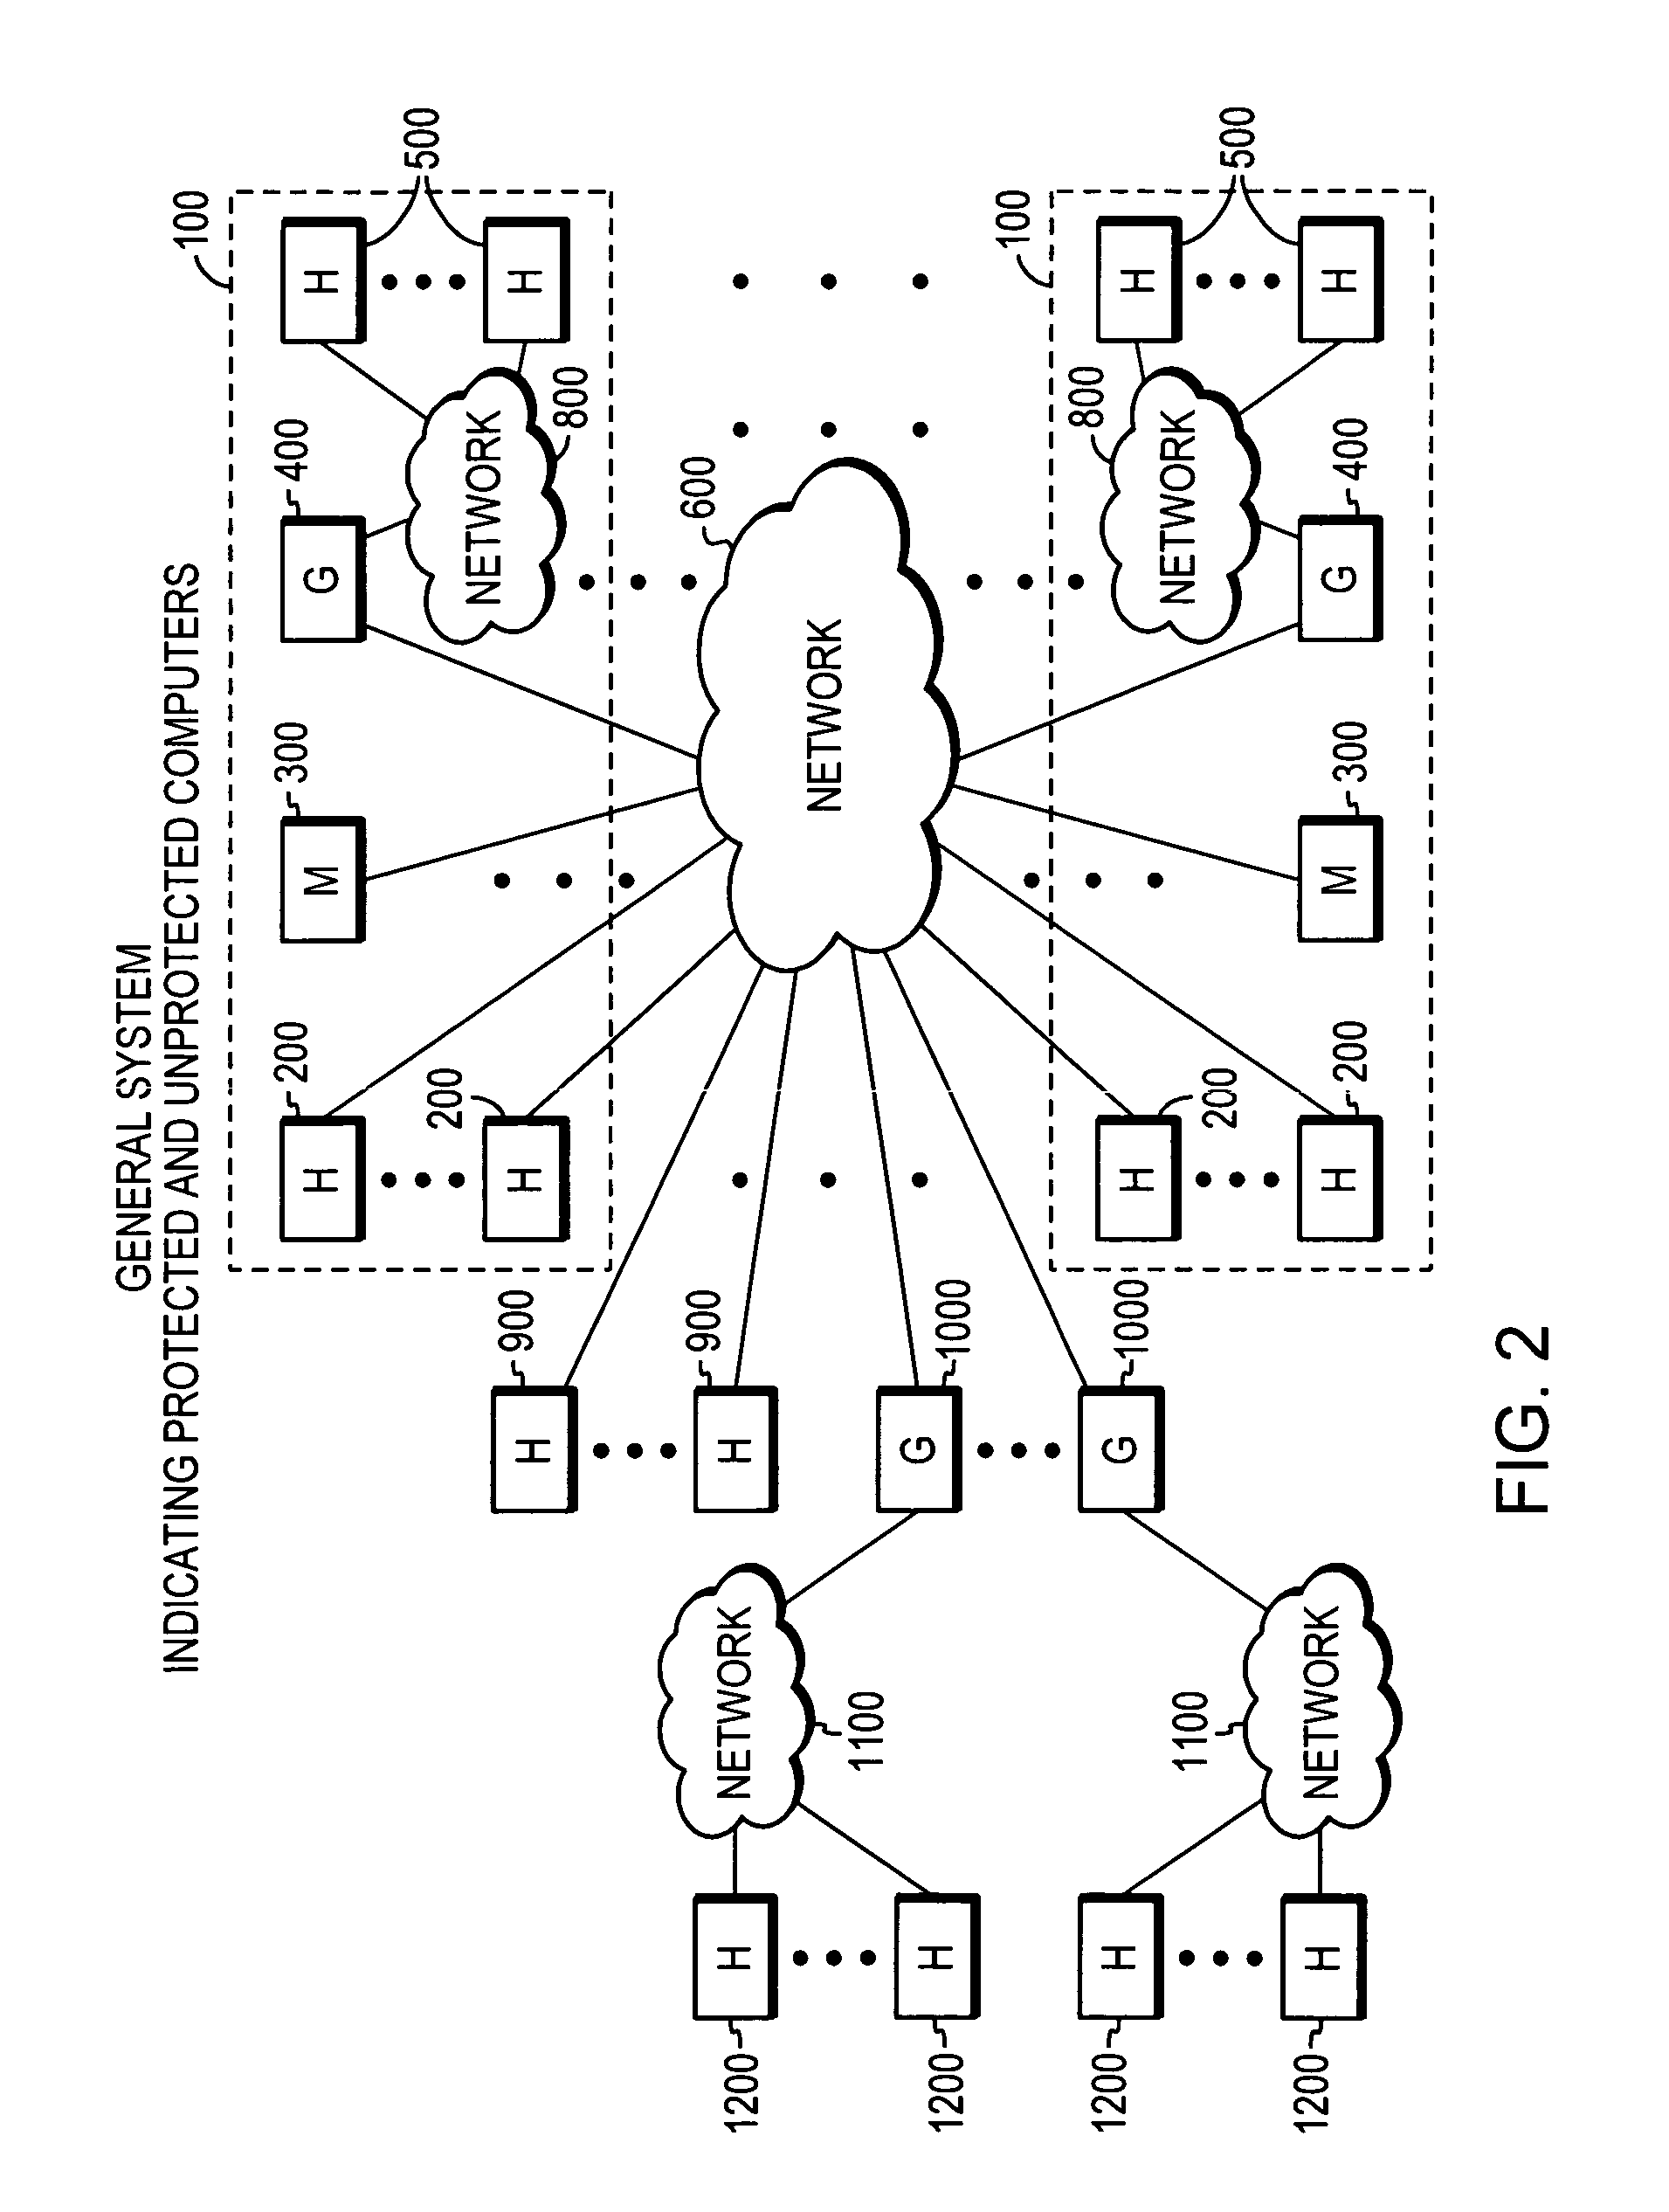 System, apparatuses, methods and computer-readable media for determining security status of computer before establishing network connection second group of embodiments-claim set III